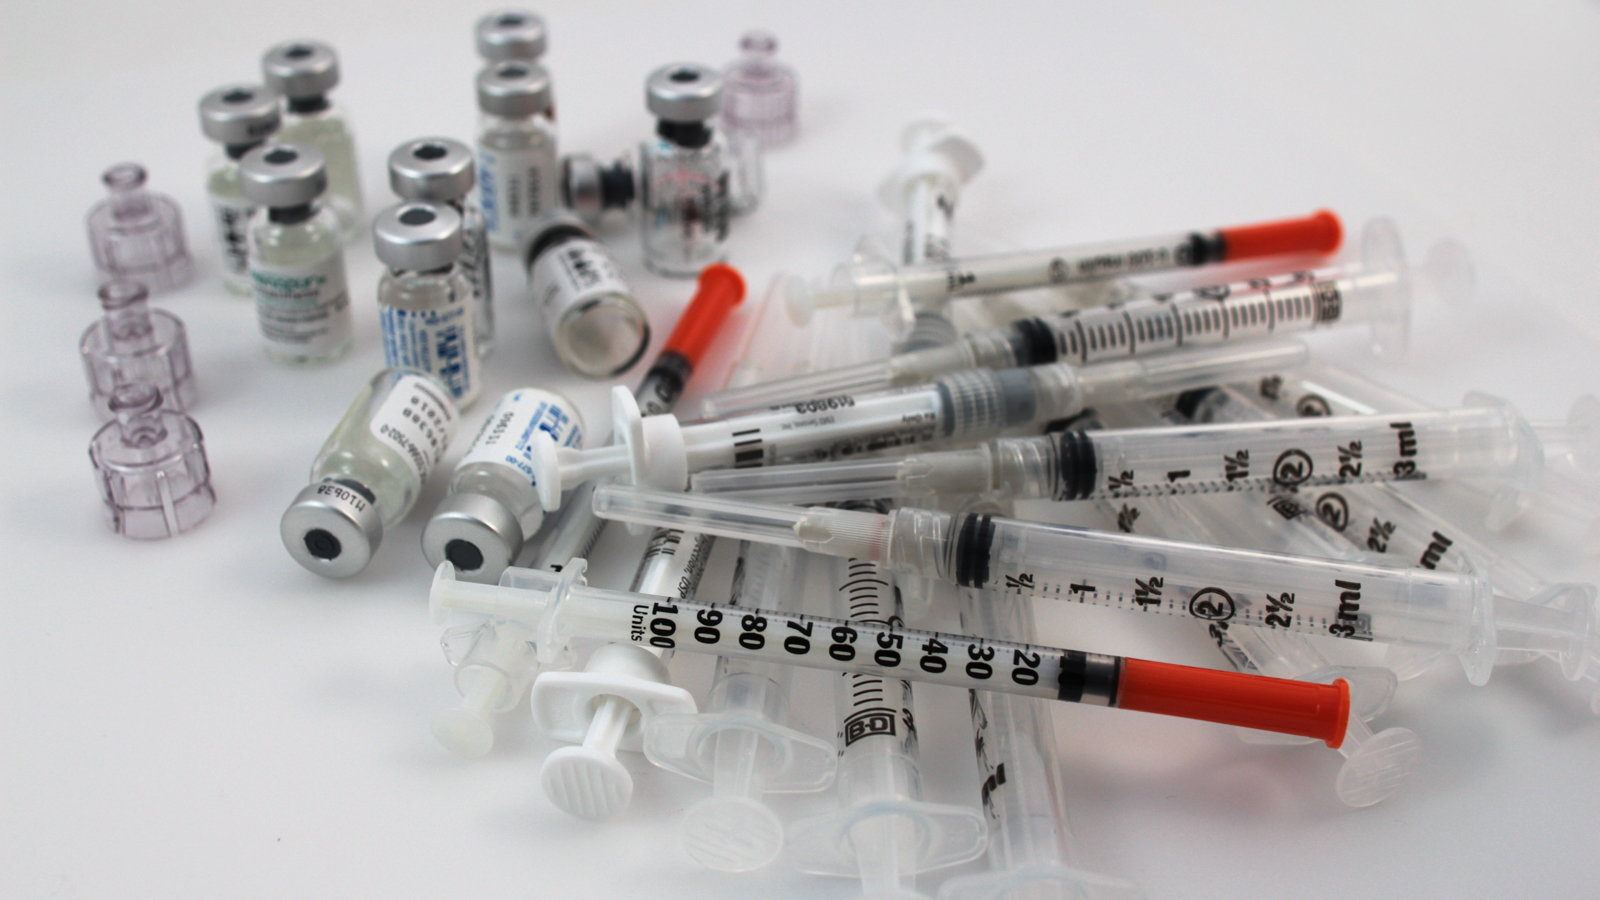 vials and syringes